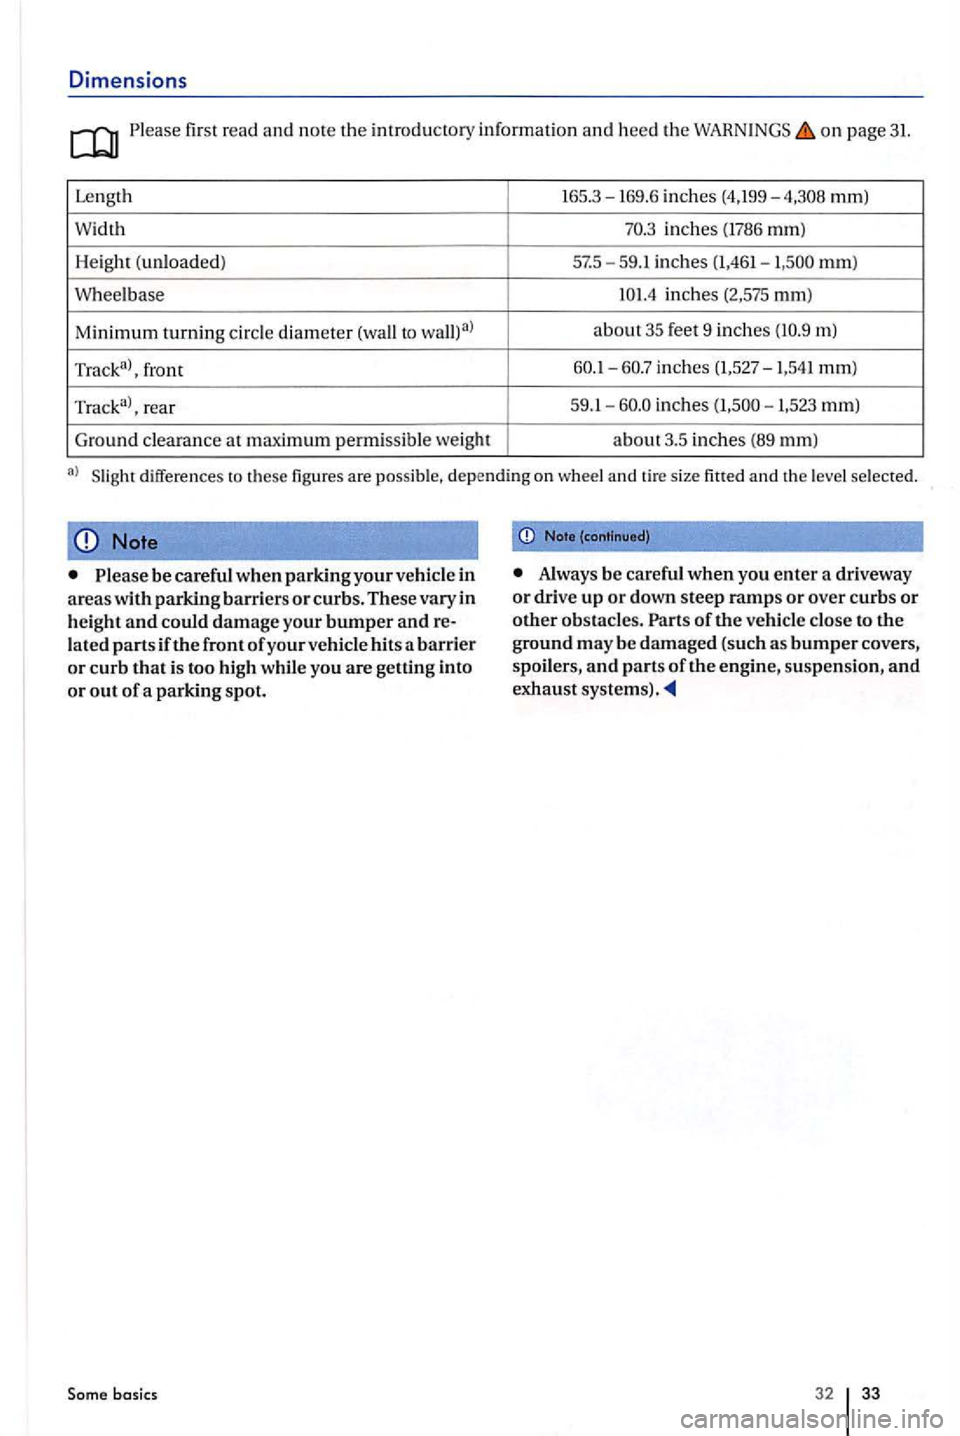 VOLKSWAGEN GOLF PLUS 2012  Owners Manual Dimensions 
Please first read a nd note th e imrodu ctory  informa tion  and  hee d th e on  pa ge 31. 
Le ngt h  165.3-
16 9 .6  in ches  (4,199-mm) 
W id th 
inch es (1786 mm) 
H eig
ht ( unload ed 